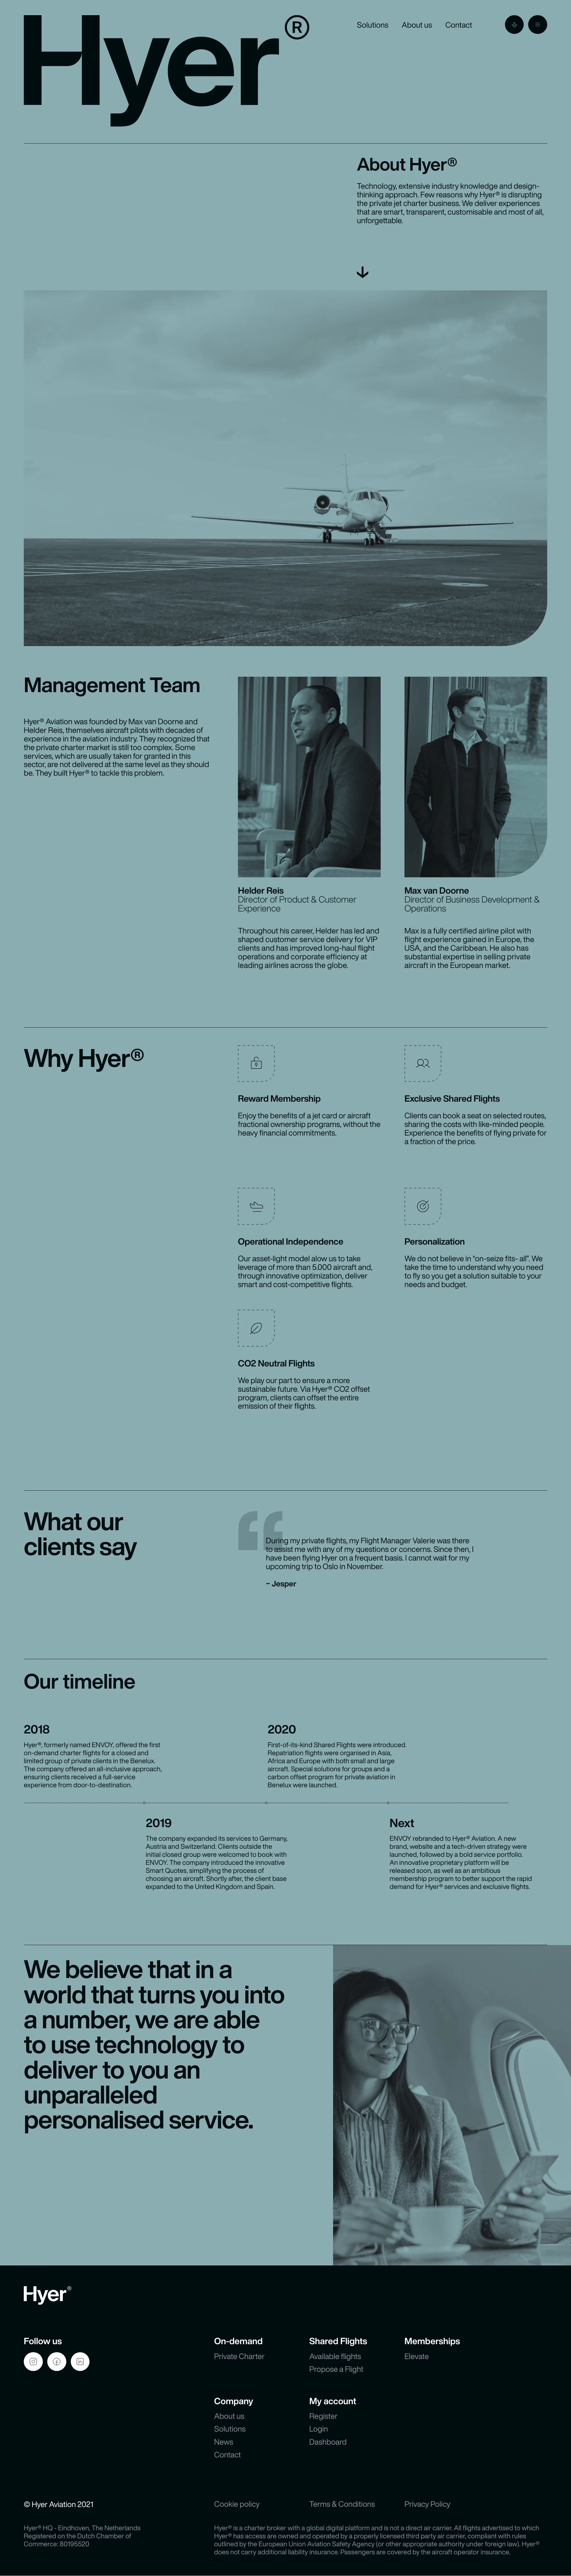 HYER Landing Page Example: We believe that in a world where passengers have become numbers, a personal approach is key to ensure you get the most out of your flying experience.